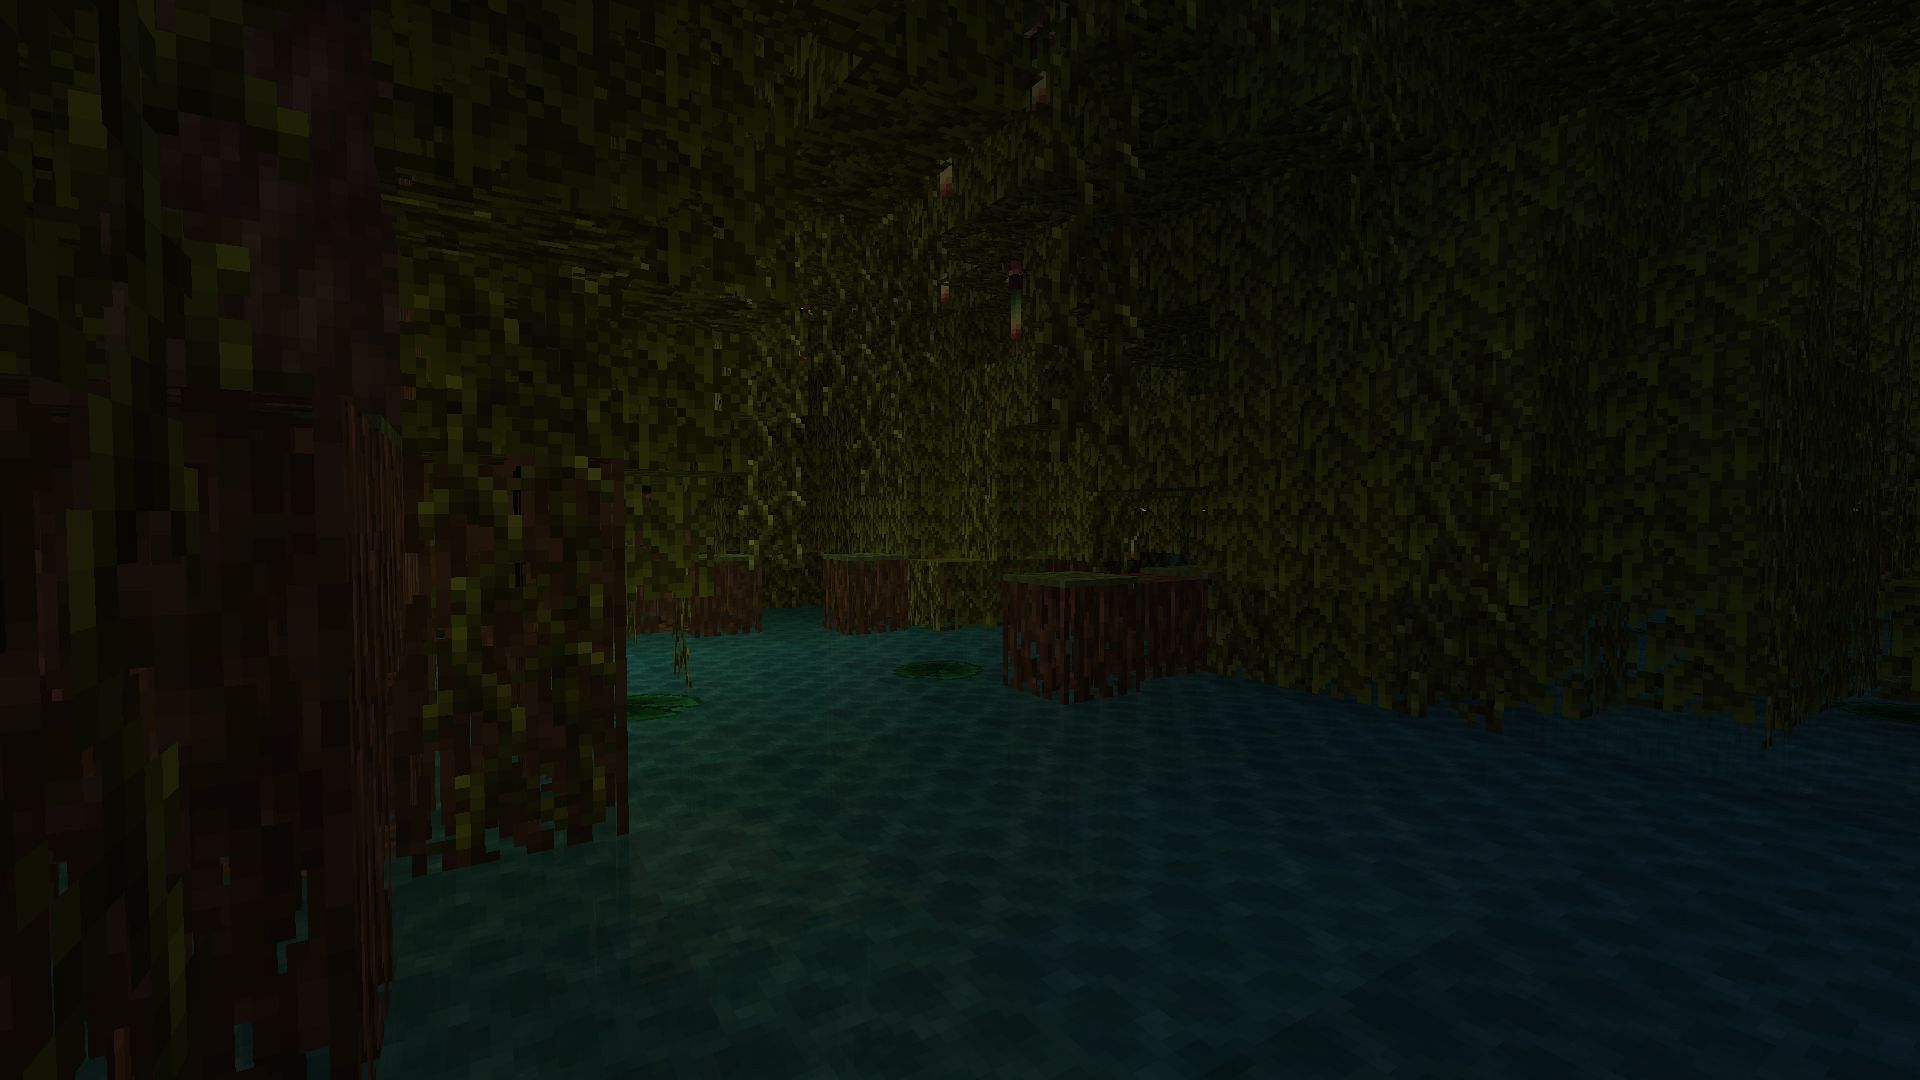 An example of a mangrove swamp at night (Image via Minecraft)